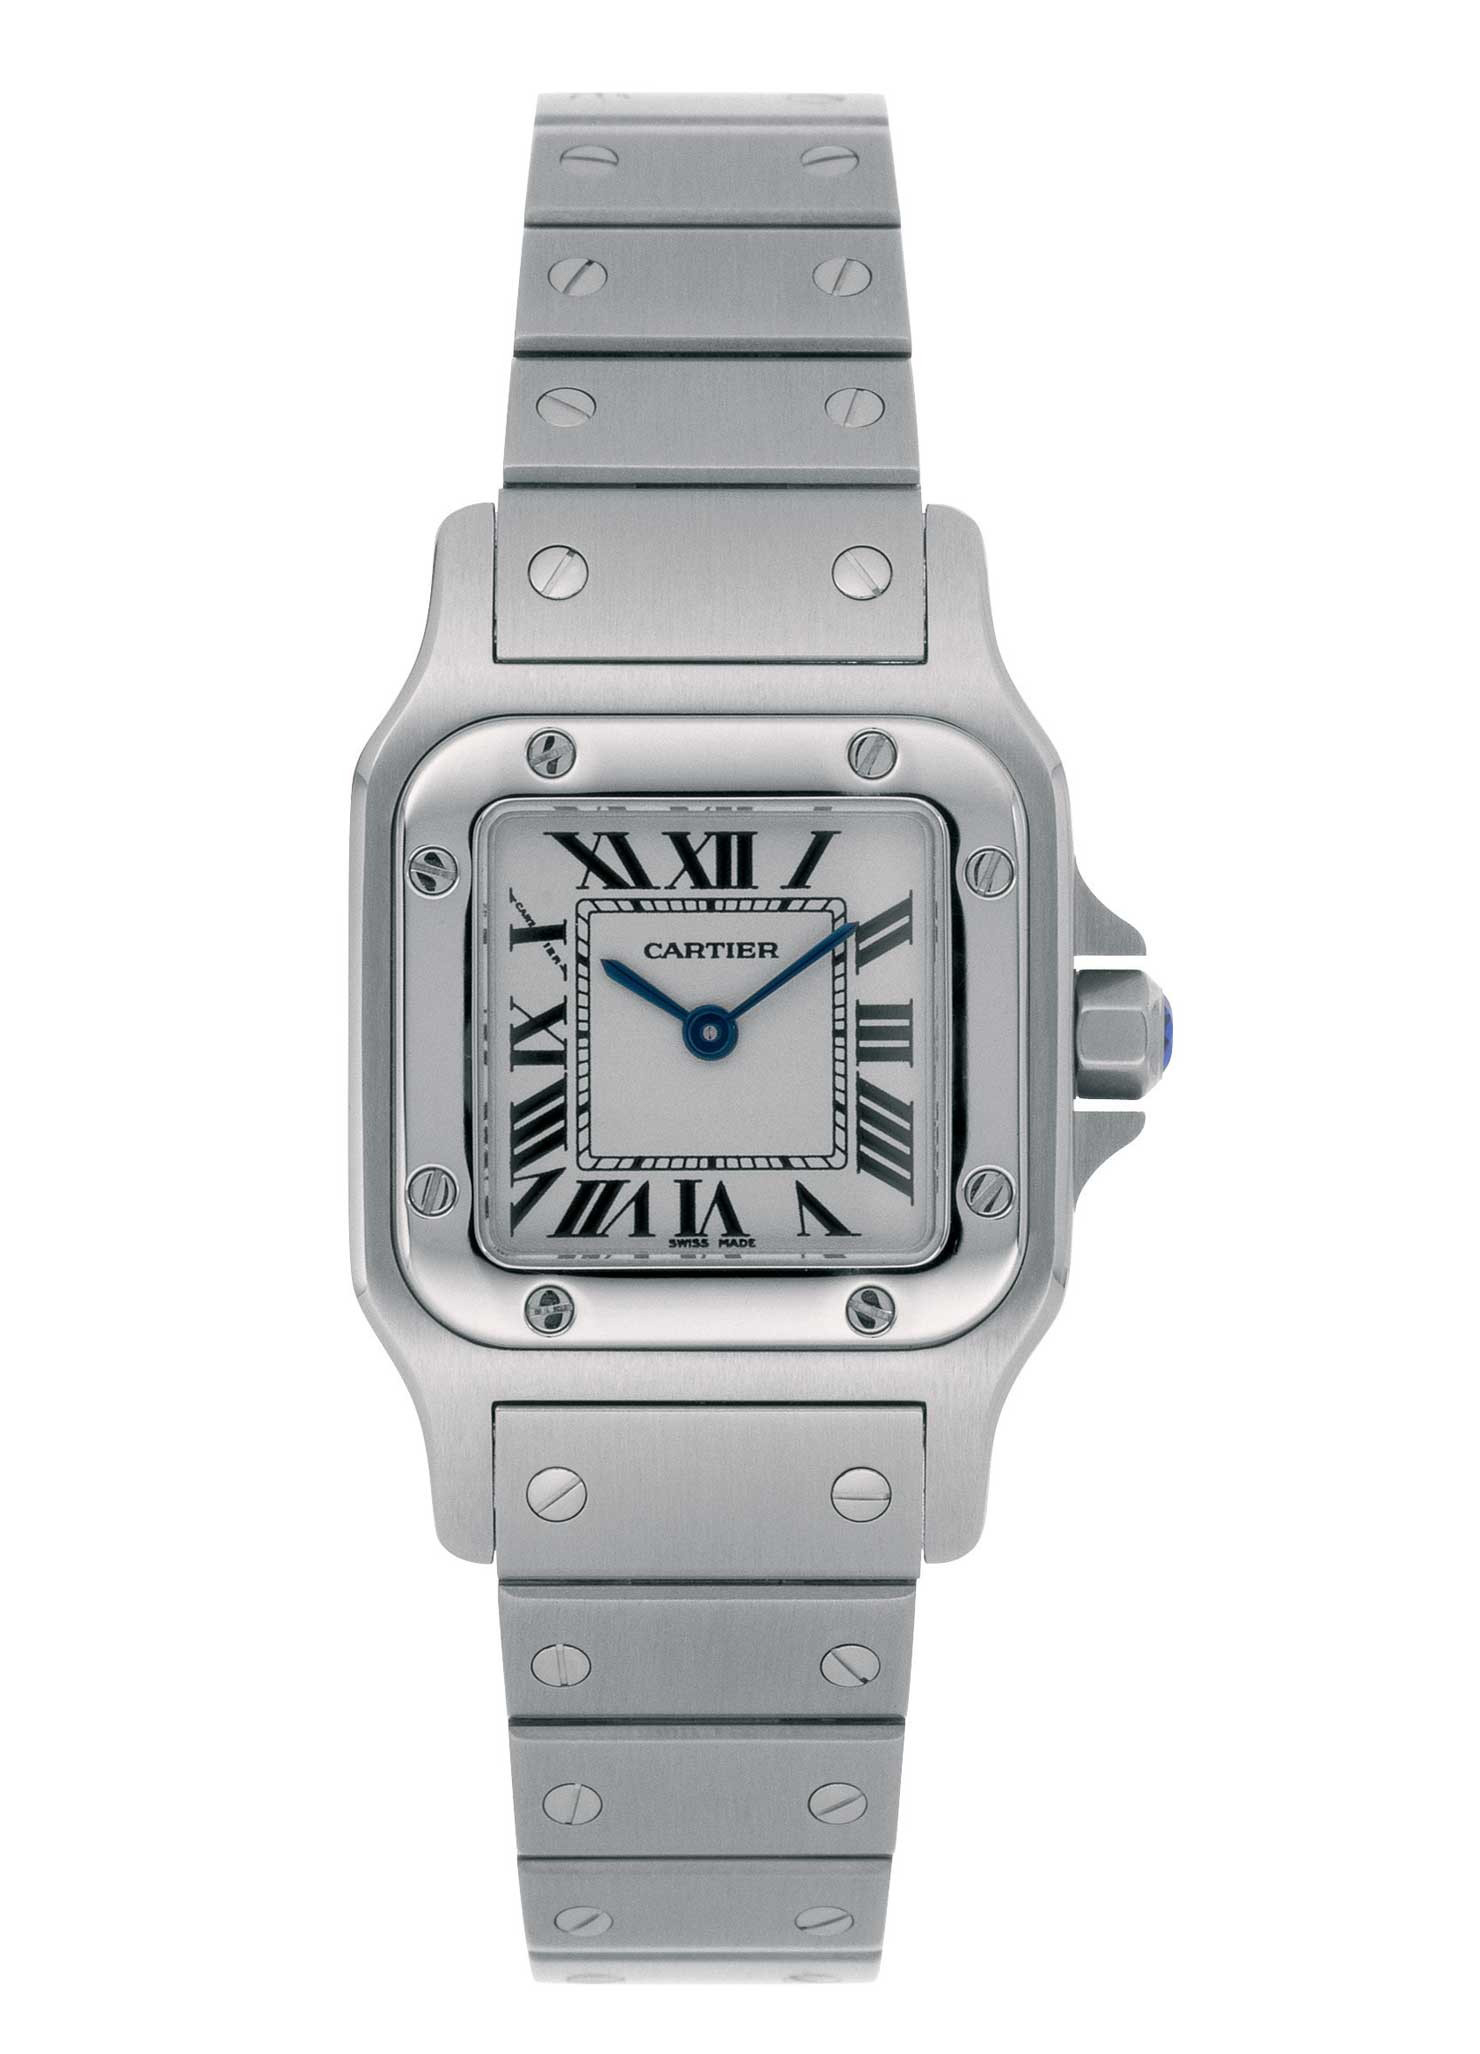 how much is a cartier watch battery